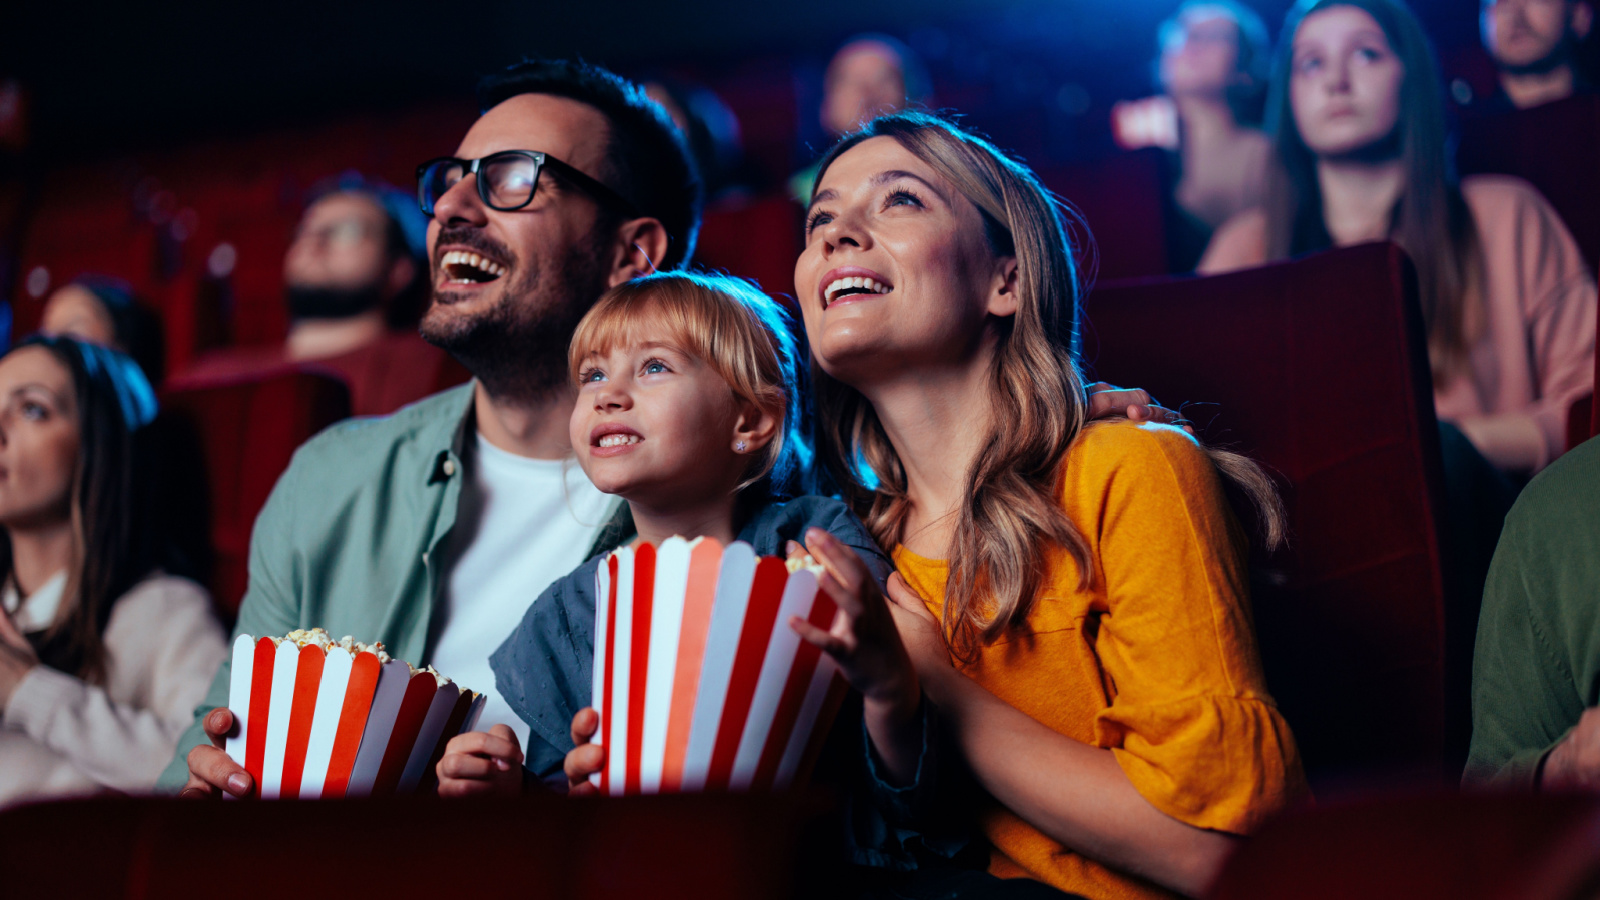 image credit: bbernard/shutterstock <p><span>Producer Maiello claims the use of federal tax credits takes the risk of investing in Hollywood independent films from a 9.5 level risk to a 5. If the success of this film continues, it could set a new investment stream in the entertainment industry.</span></p>